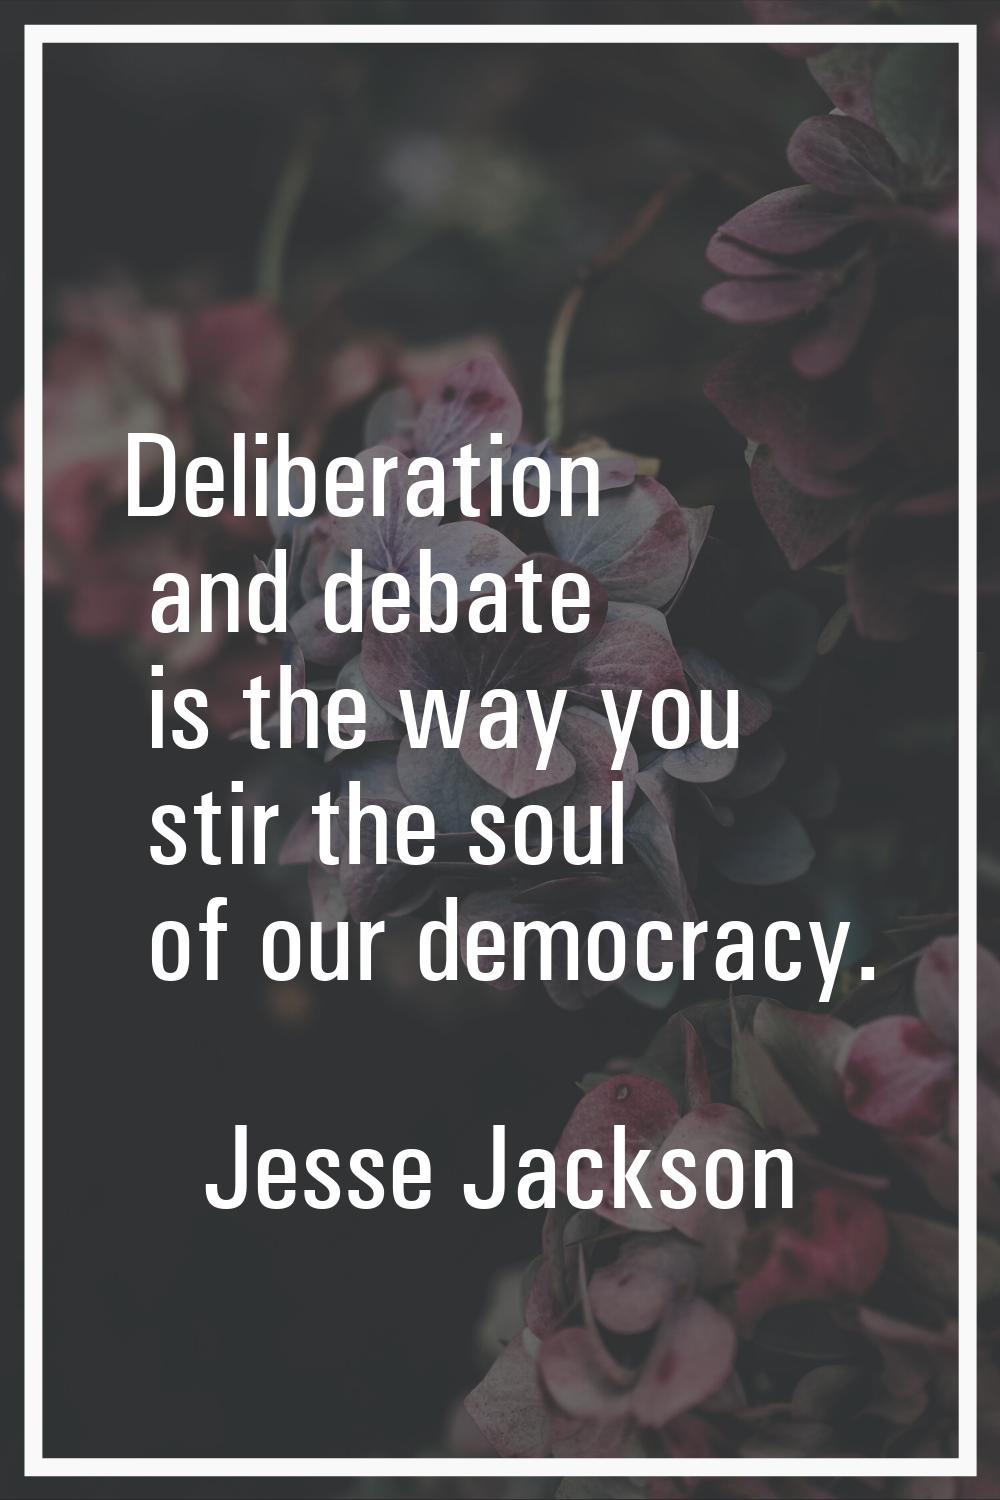 Deliberation and debate is the way you stir the soul of our democracy.